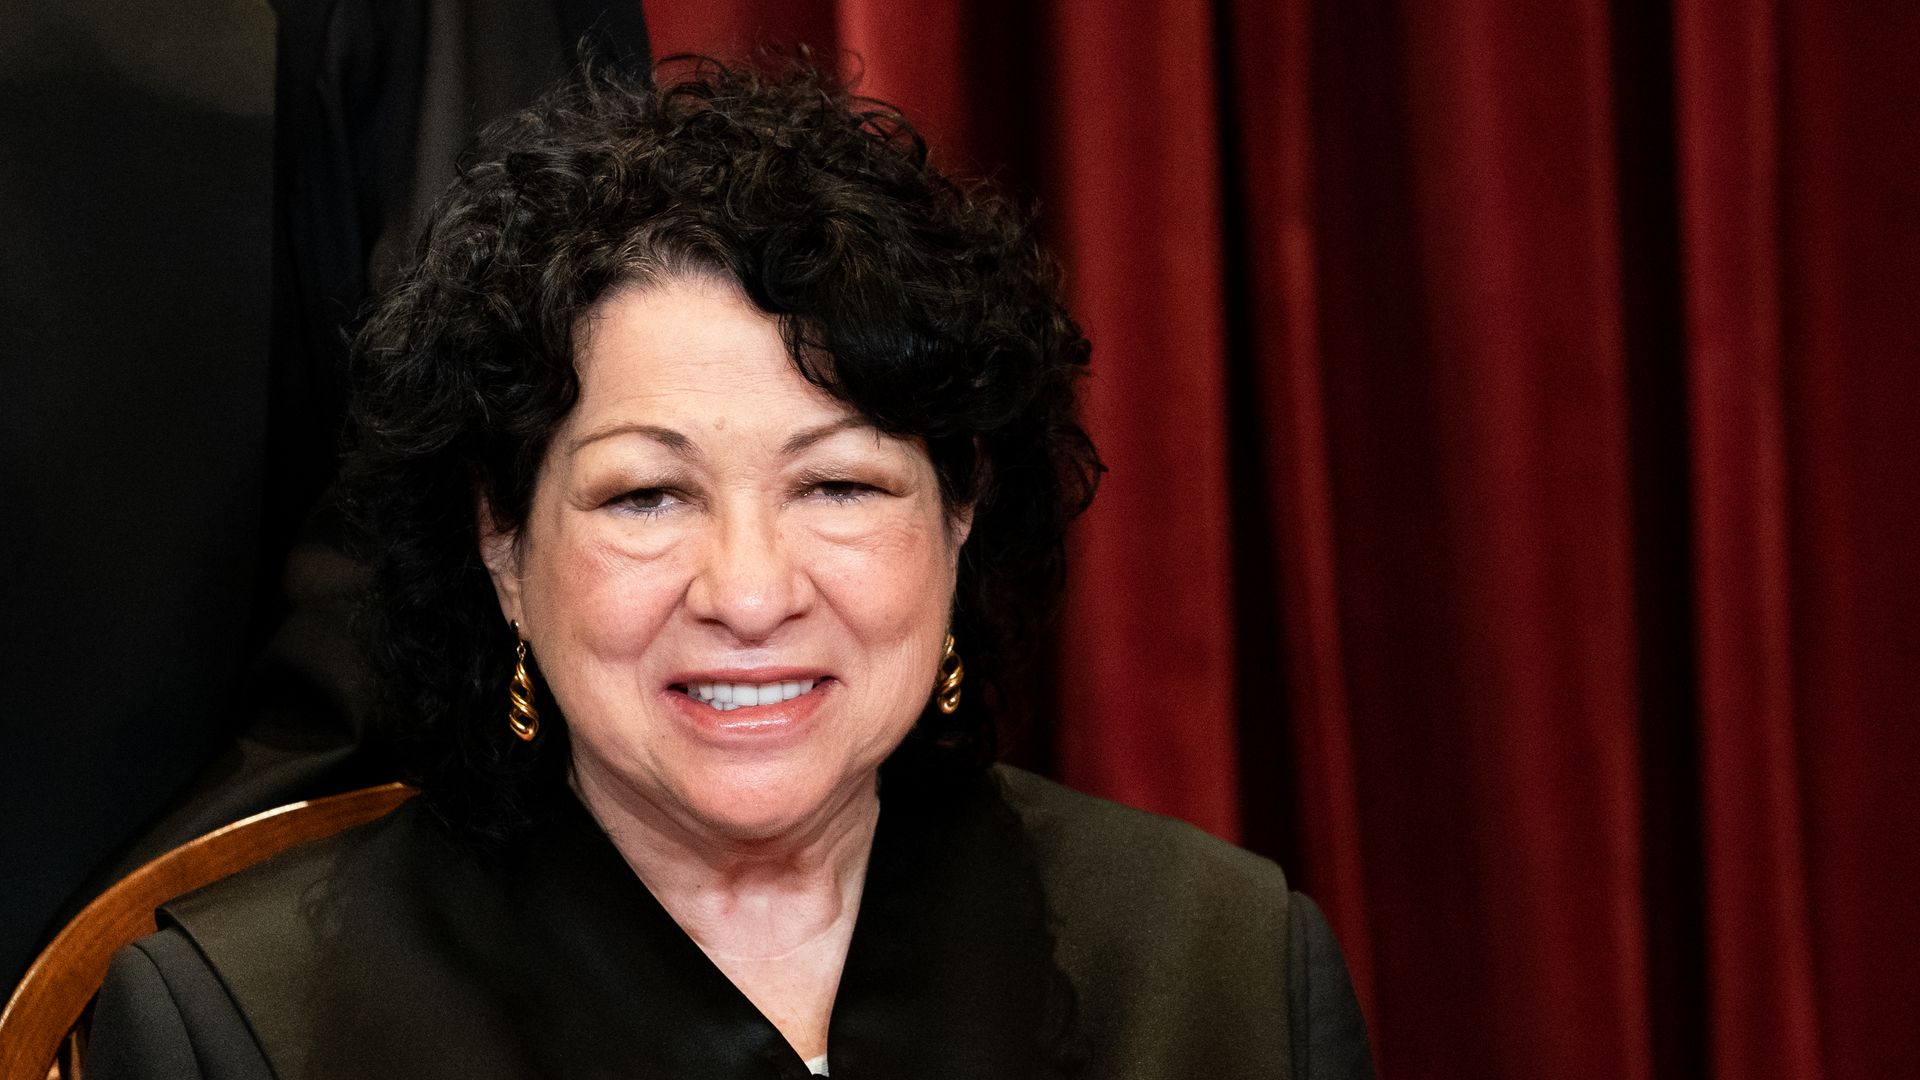 Associate Justice Sonia Sotomayor sits during a group photo of the Justices at the Supreme Court in Washington, DC on April 23, 2021.